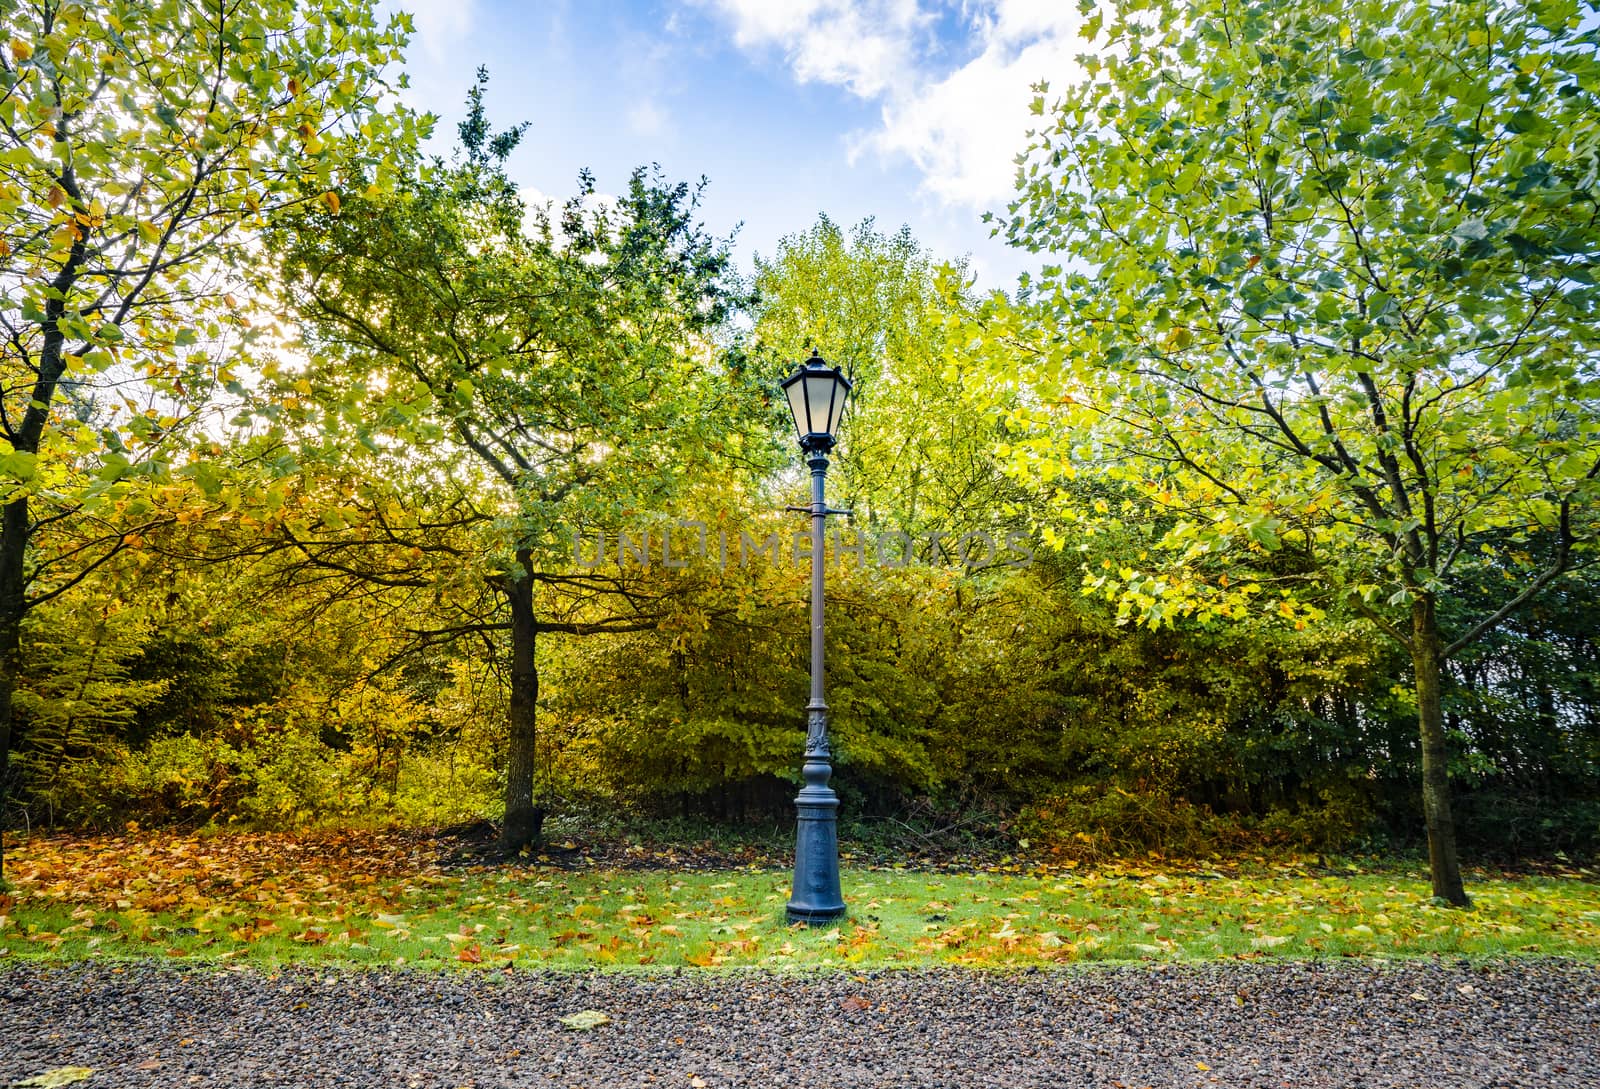 Autumn scenery with a retro street lamp in a park by Sportactive